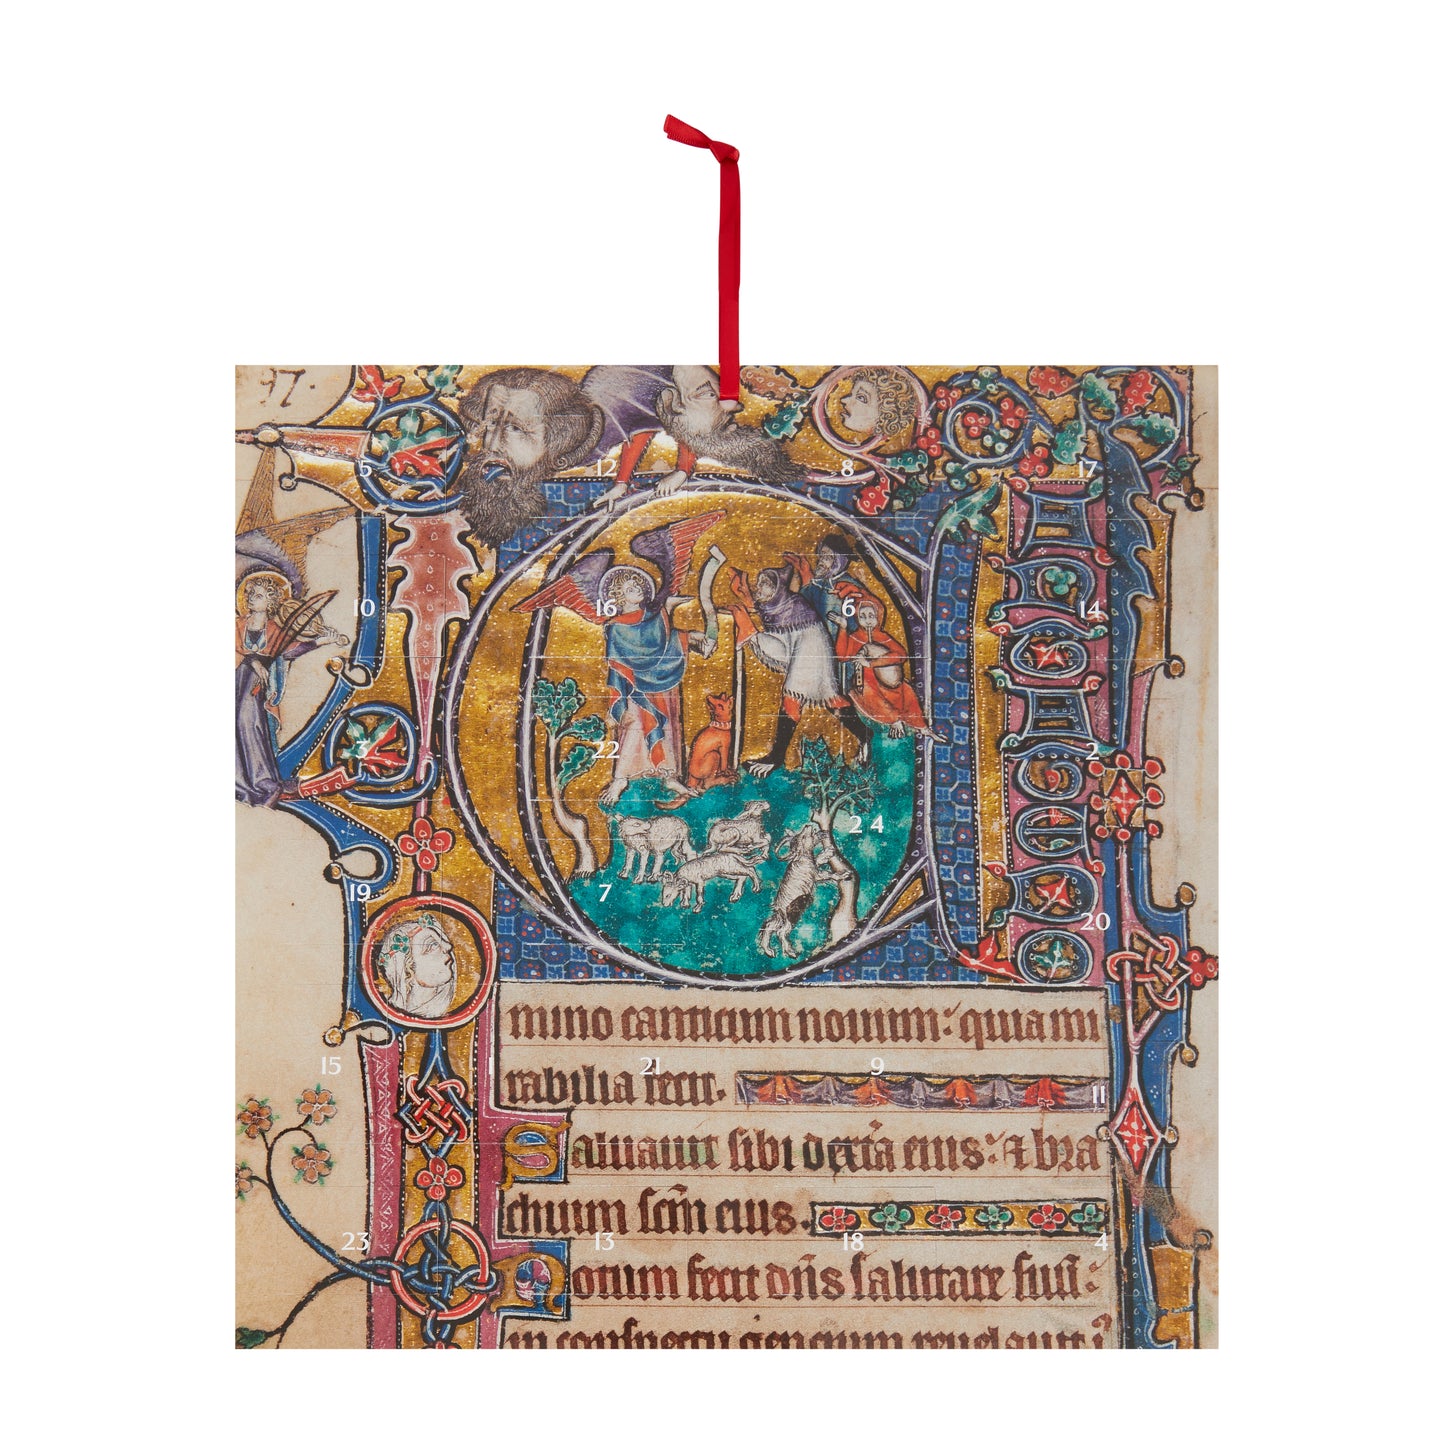 Large advent calendar - The Macclesfield Psalter illuminated manuscript. From the collection of The Fitzwilliam Museum, brought to you by CuratingCambridge.com